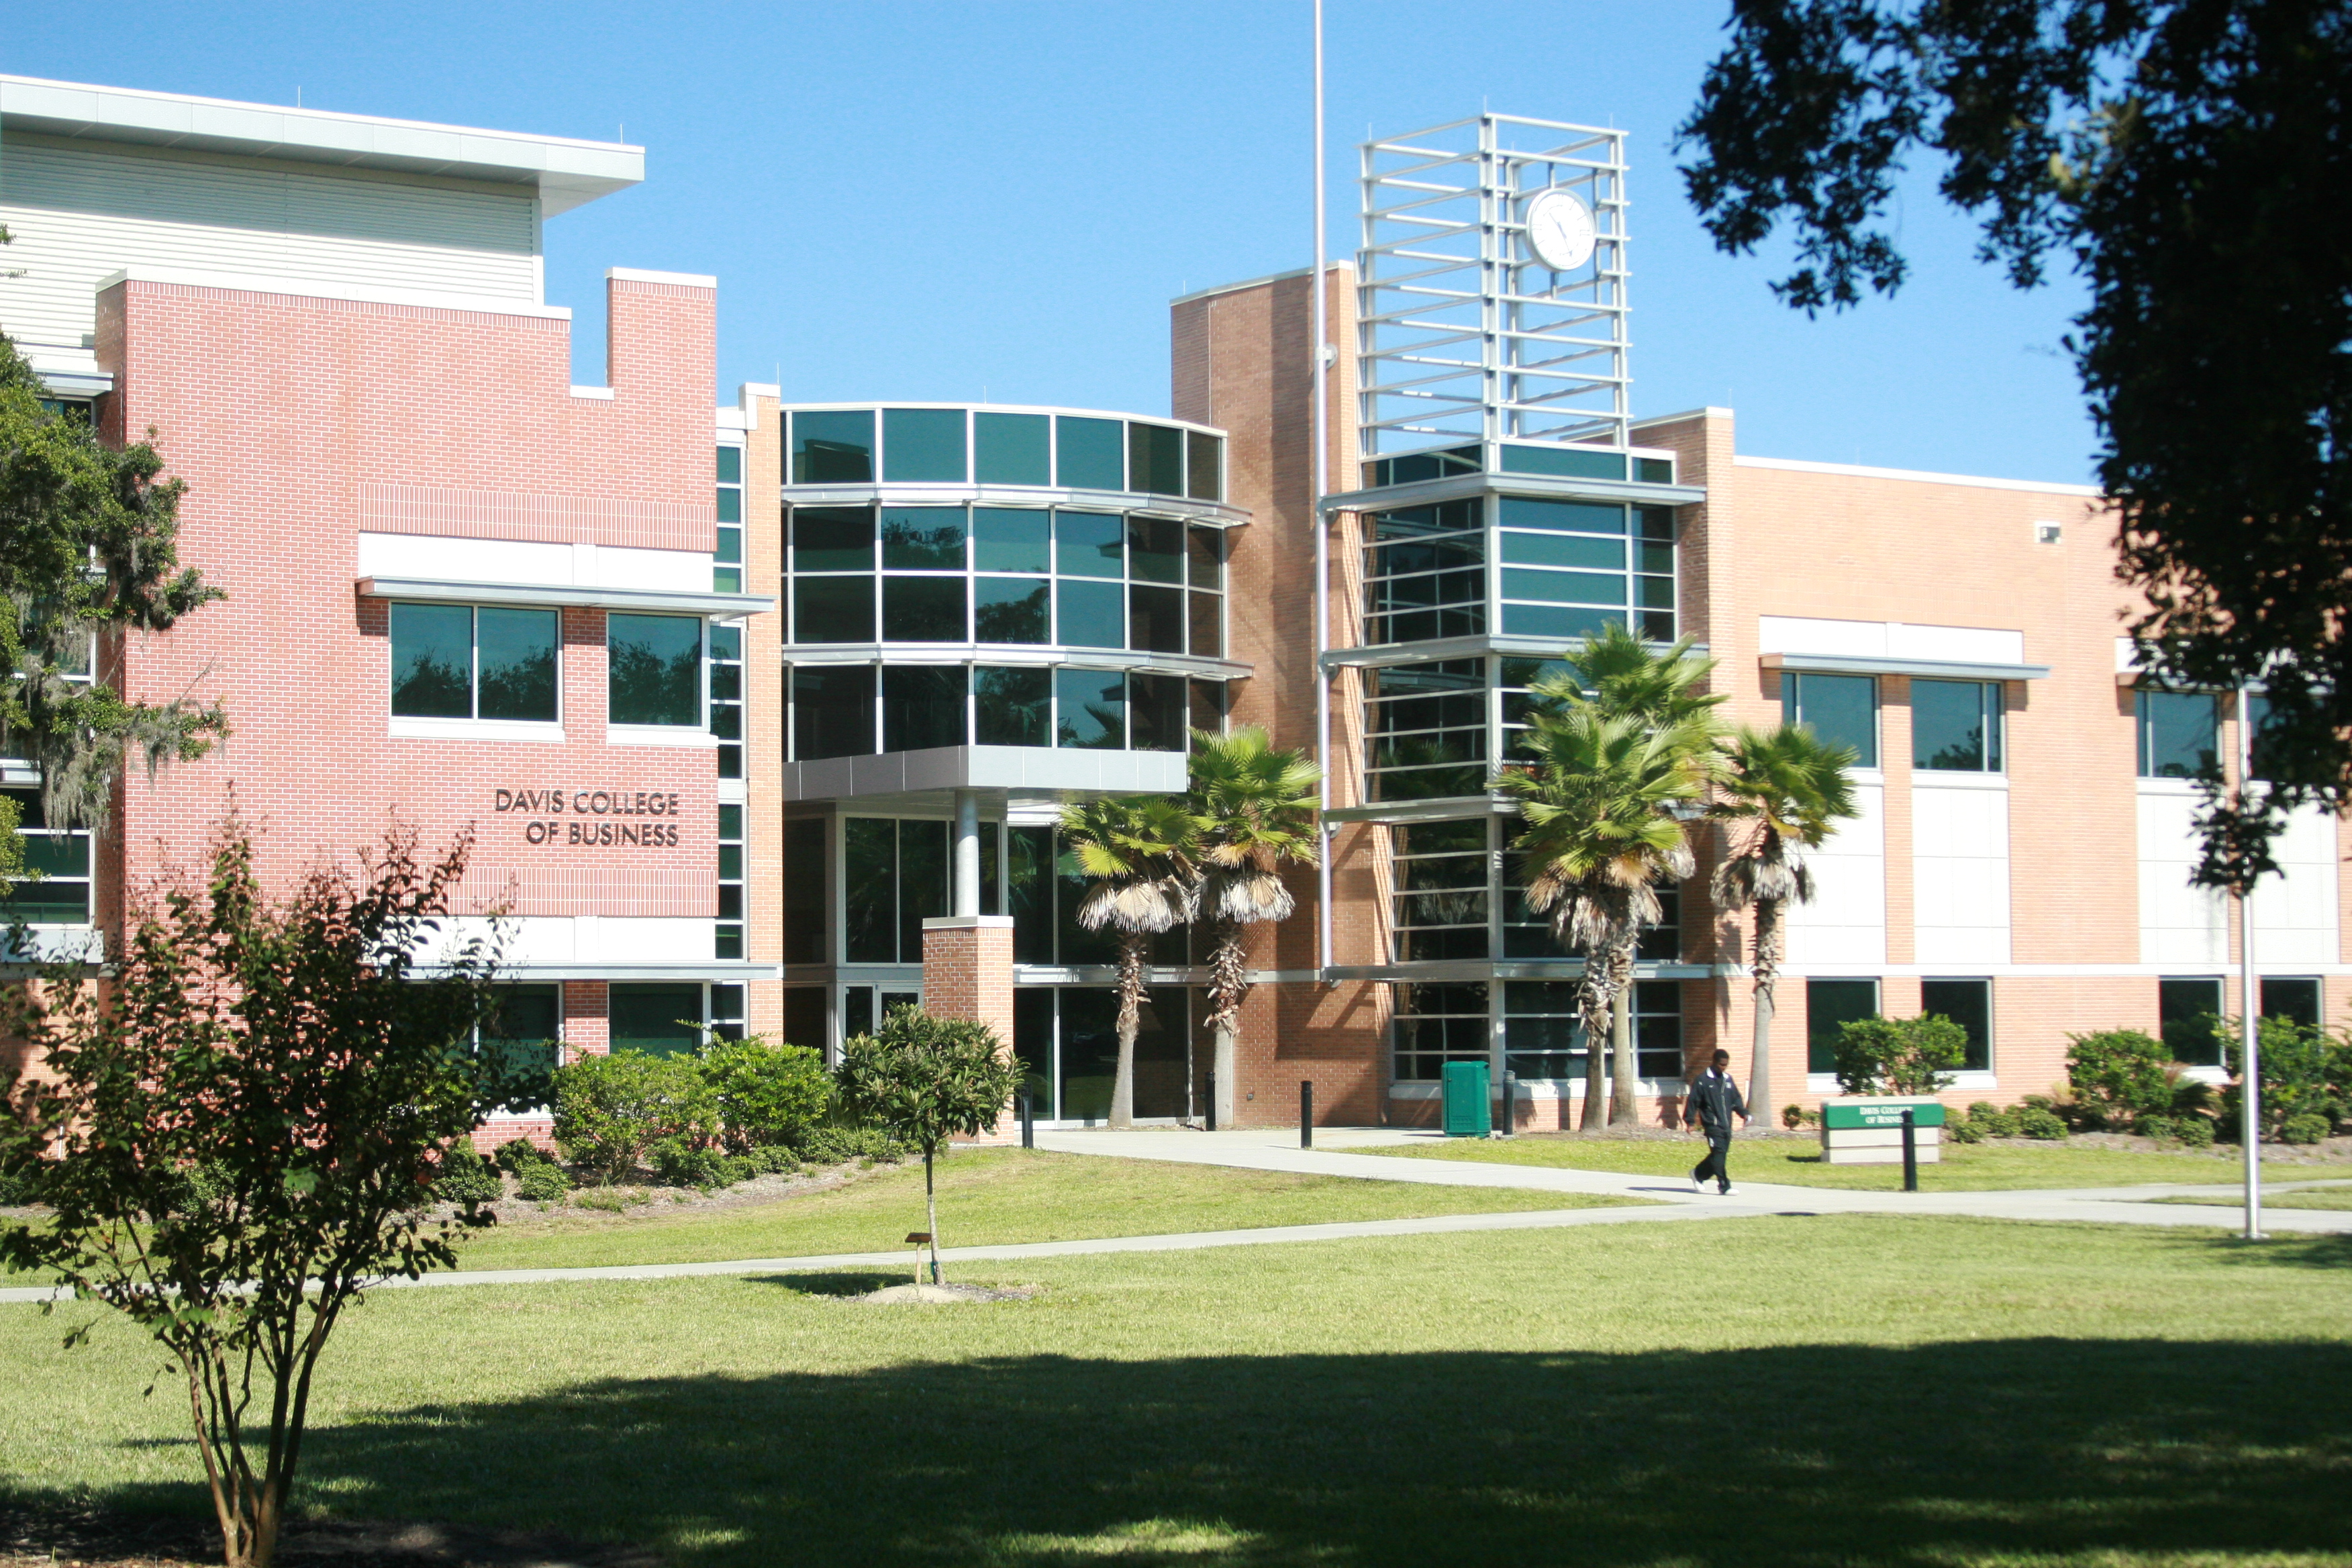 Jacksonville University's Davis College of Business is the only AACSB-accredited private business school in North Florida and South Georgia. In 2019, the Davis College MBA program earned a Tier One spot in CEO Magazine’s list of the best MBA programs among 134 elite schools. The magazine also ranked the College’s Executive MBA program as the best in Florida and 25th in the world.